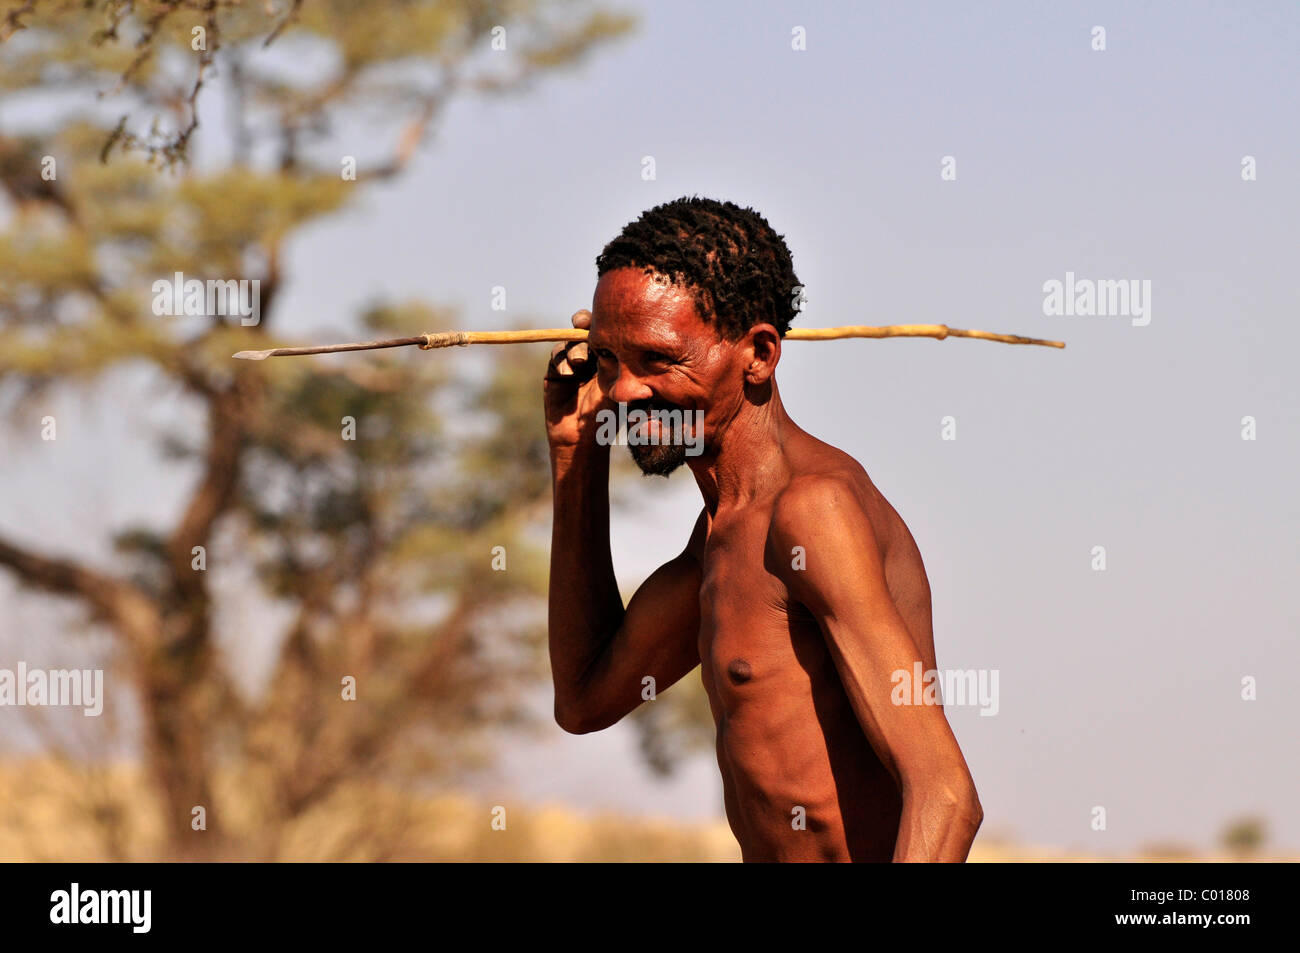 Man of the Khomani-San tribe in the Kalahari with a spear, South Africa, Africa Stock Photo